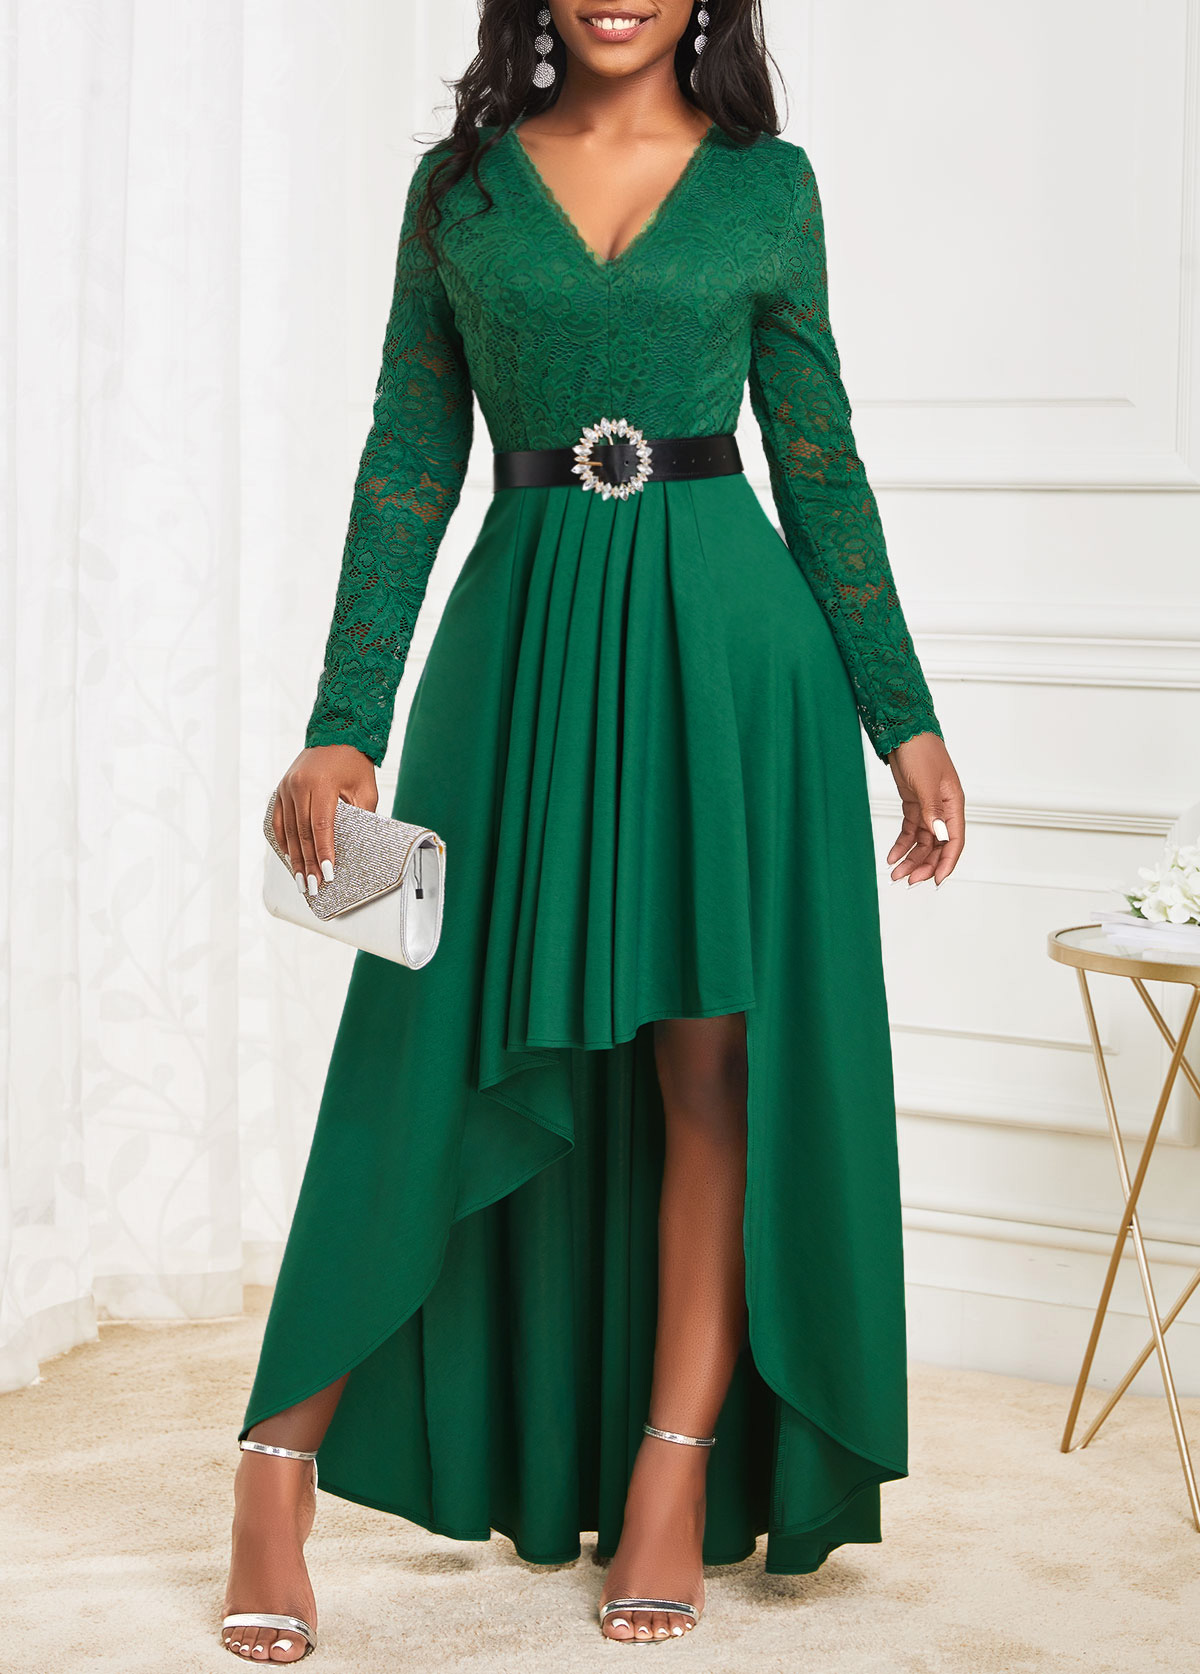 Green Lace High Low Long Sleeve Dress